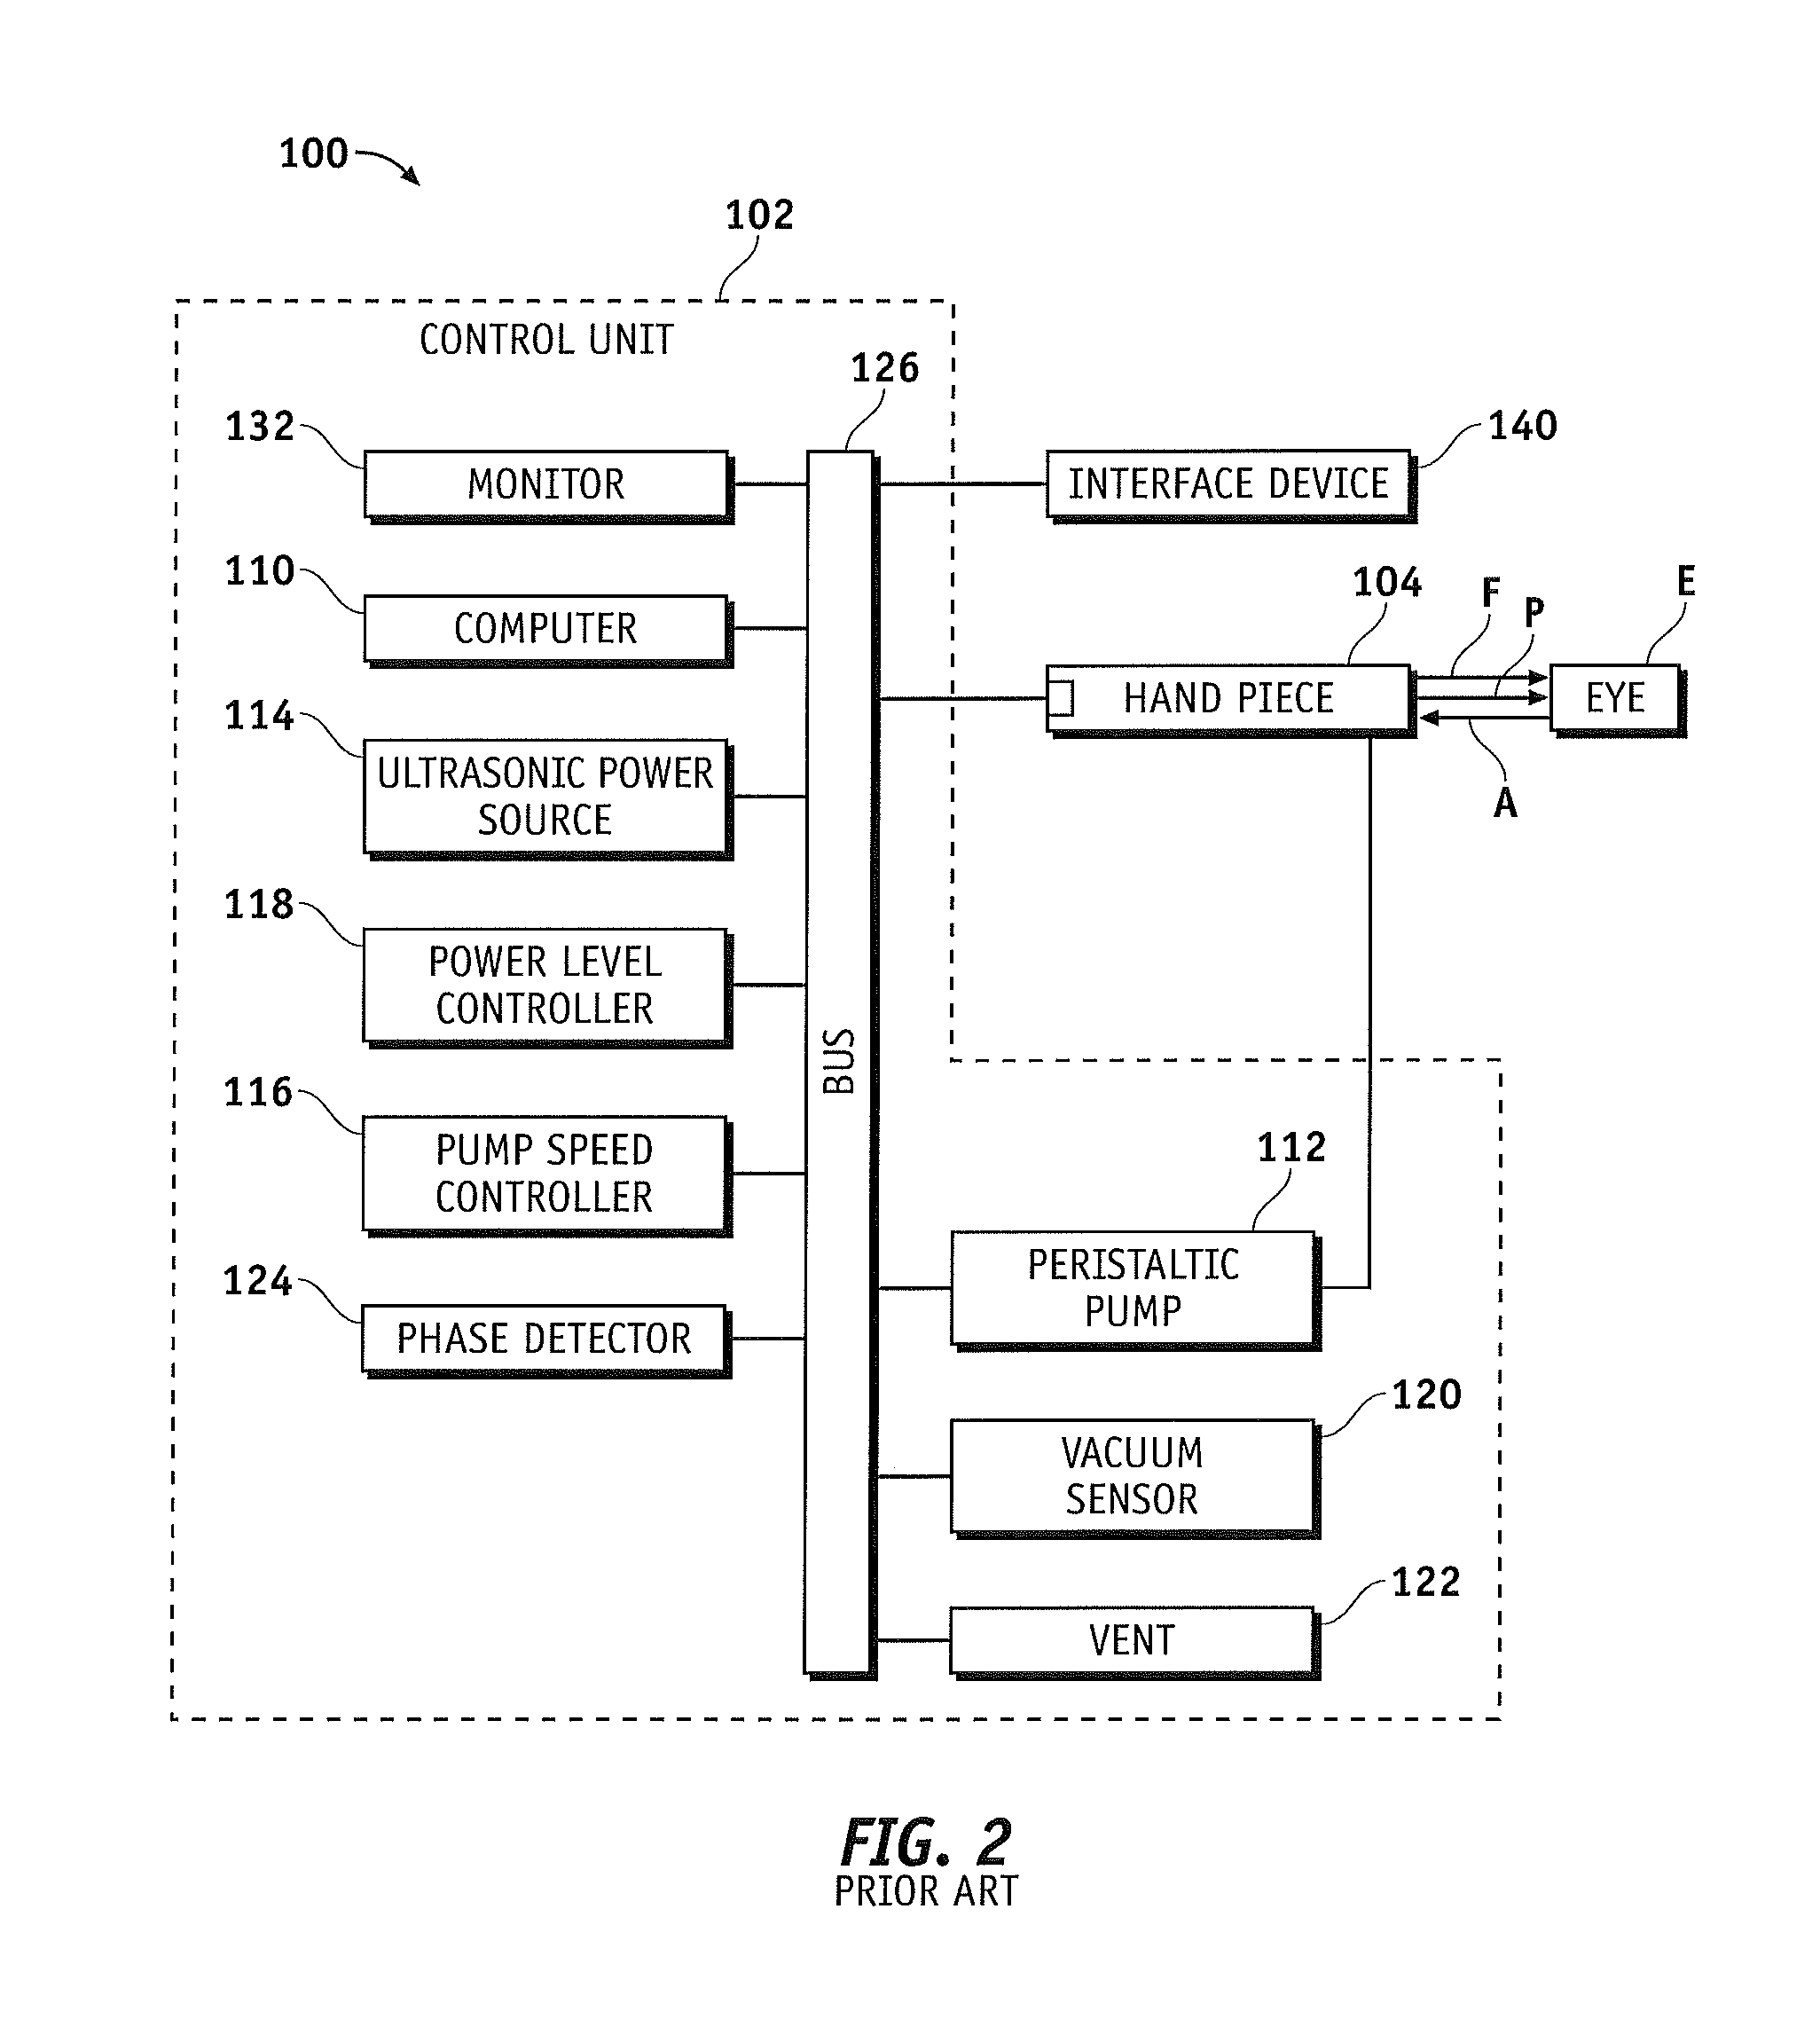 System and method for controlling a transverse phacoemulsification system using sensed data